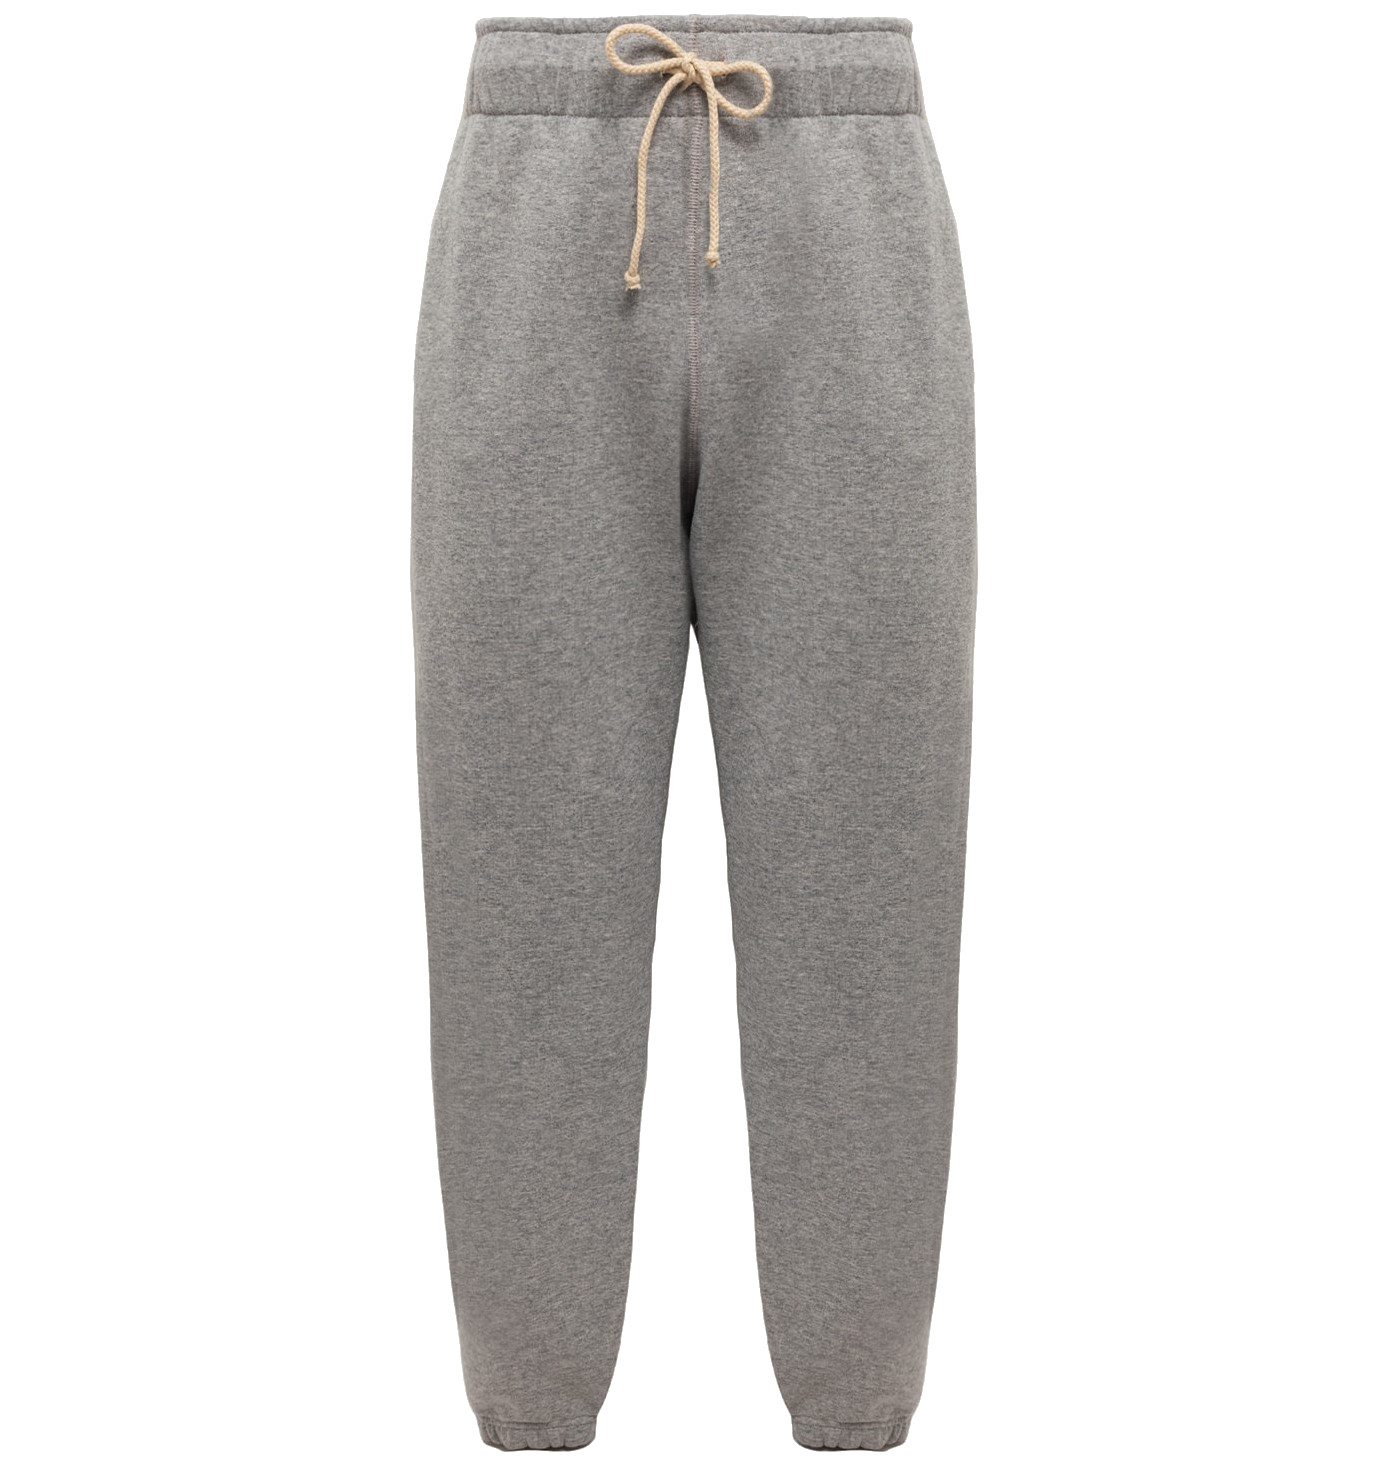 AUTRY ACTION PEOPLE Ease Sweatpant in Grey Melange XS